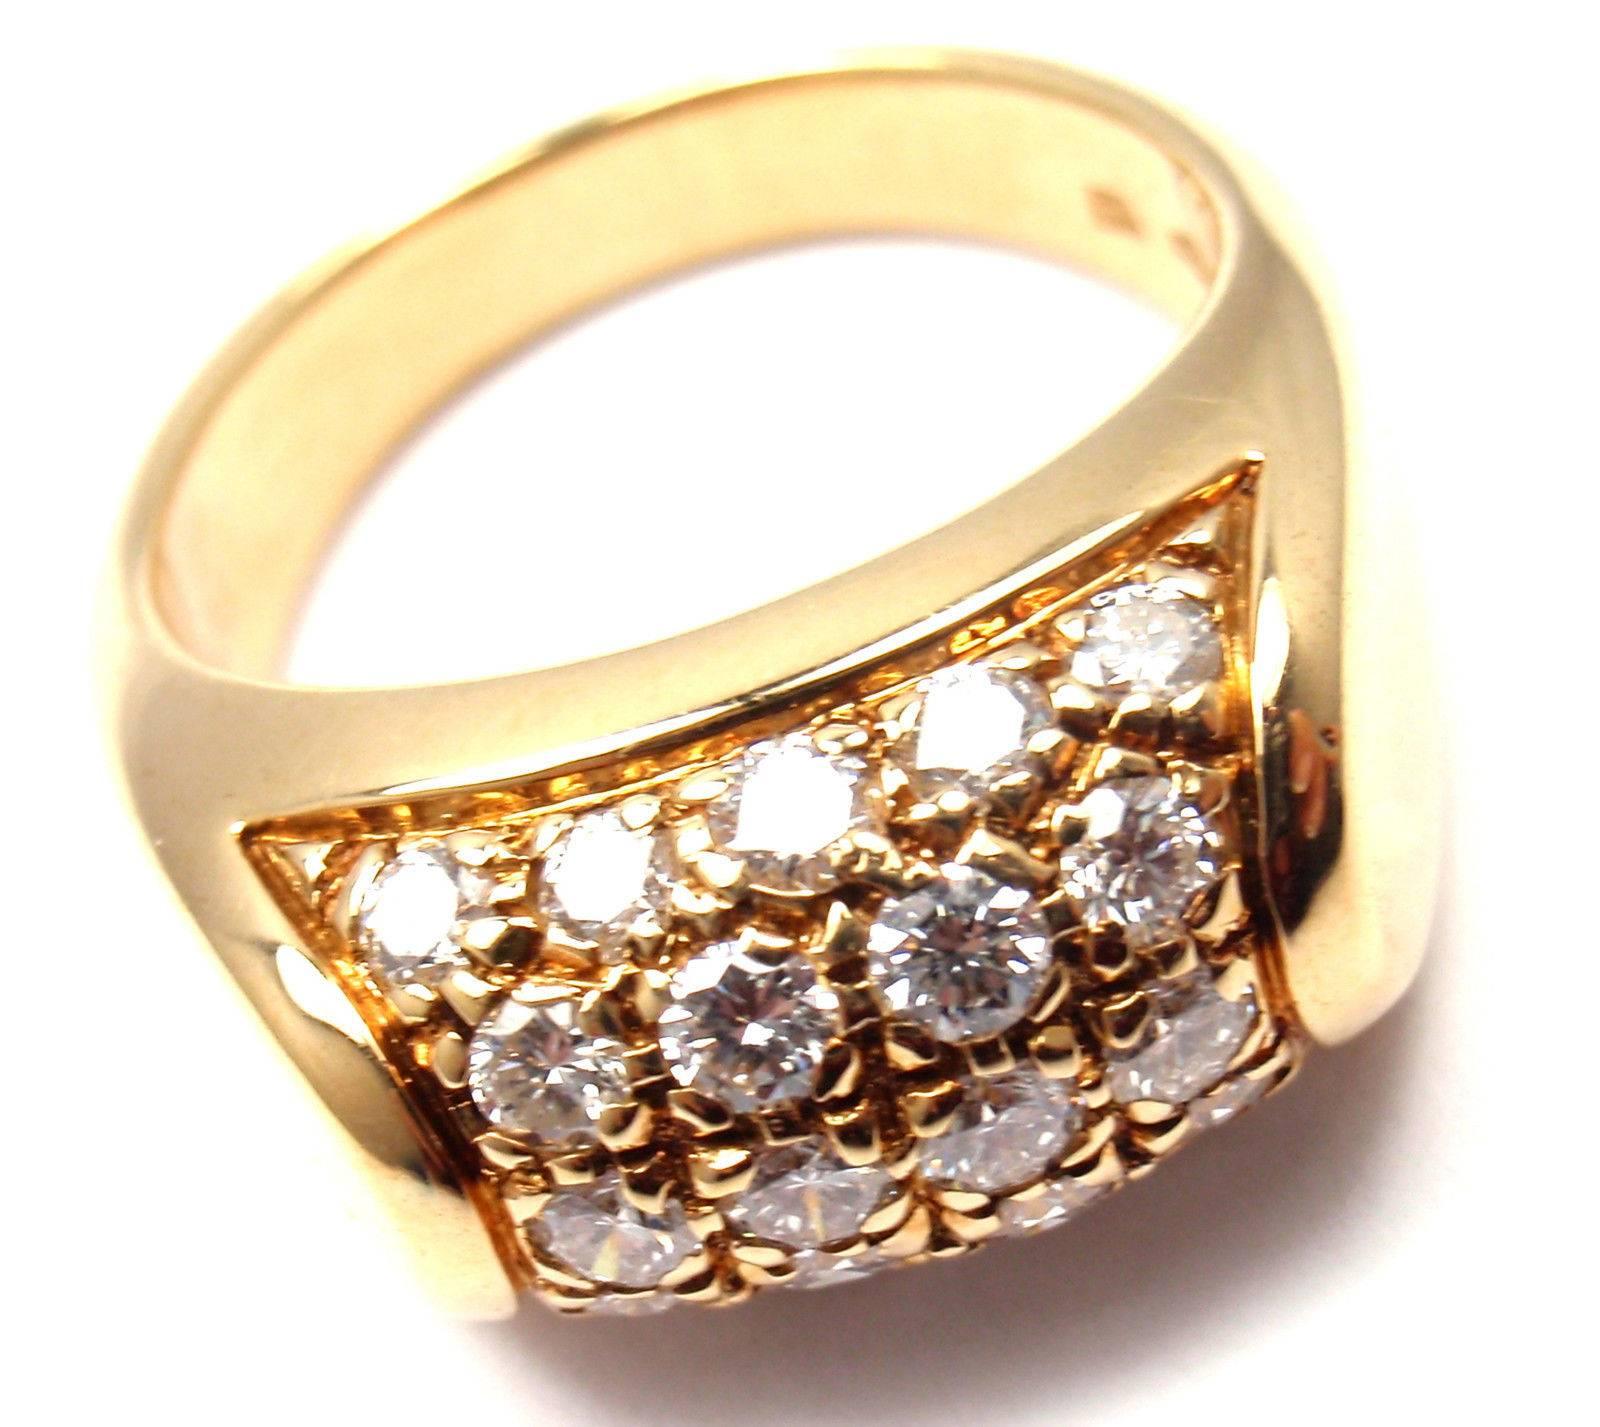 18k Yellow Gold Diamond Band Ring by Bulgari.
With round brilliant cut diamonds VS1 clarity, G color total weight approx. .75ct
Details:
Ring Size: 6
Weight: 8.8 grams
Width: 10mm
Stamped Hallmarks: Bvlgari 750 Made In Italy
*Free Shipping within